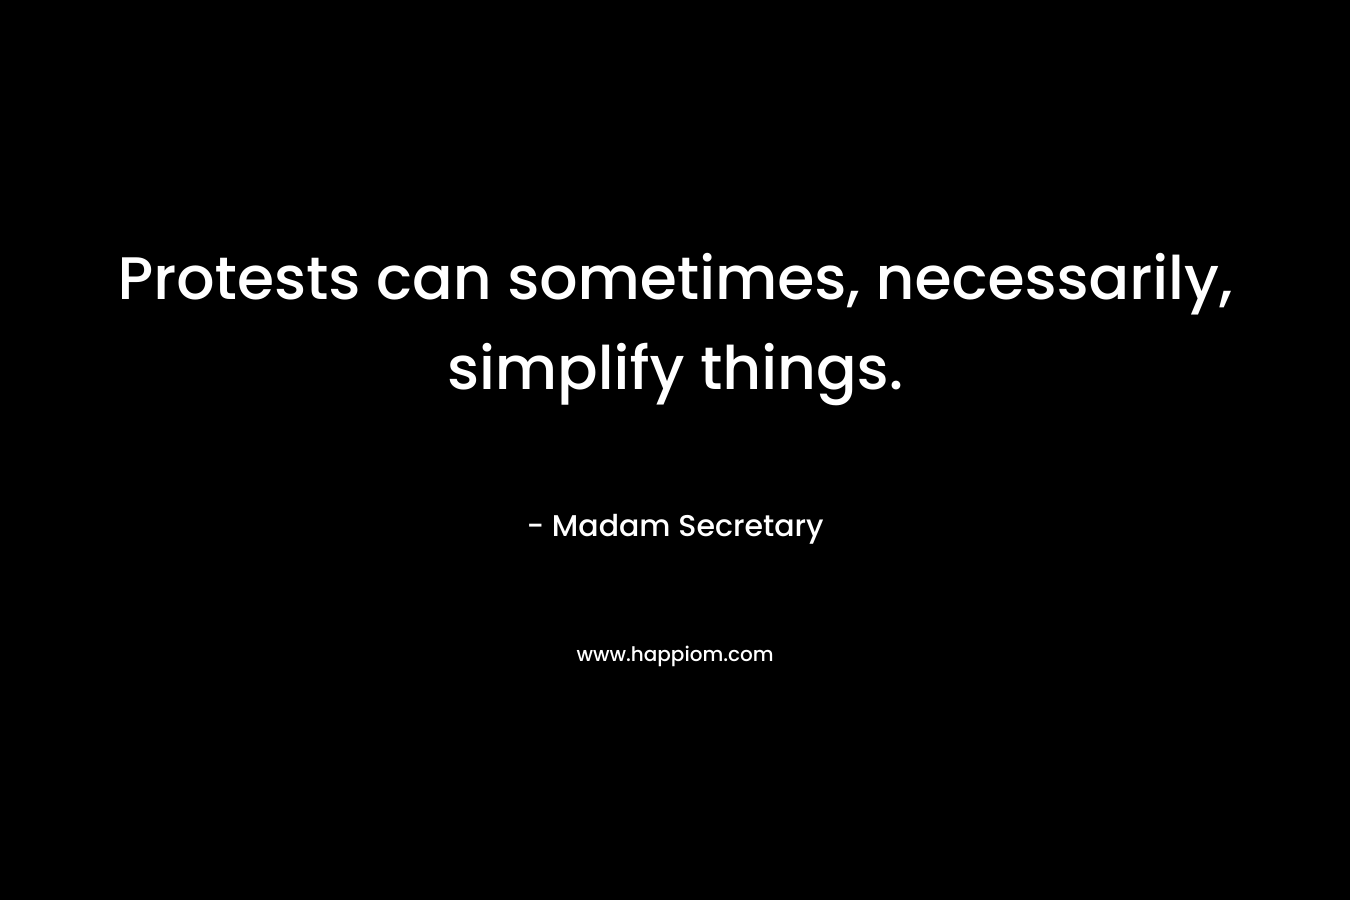 Protests can sometimes, necessarily, simplify things. – Madam Secretary